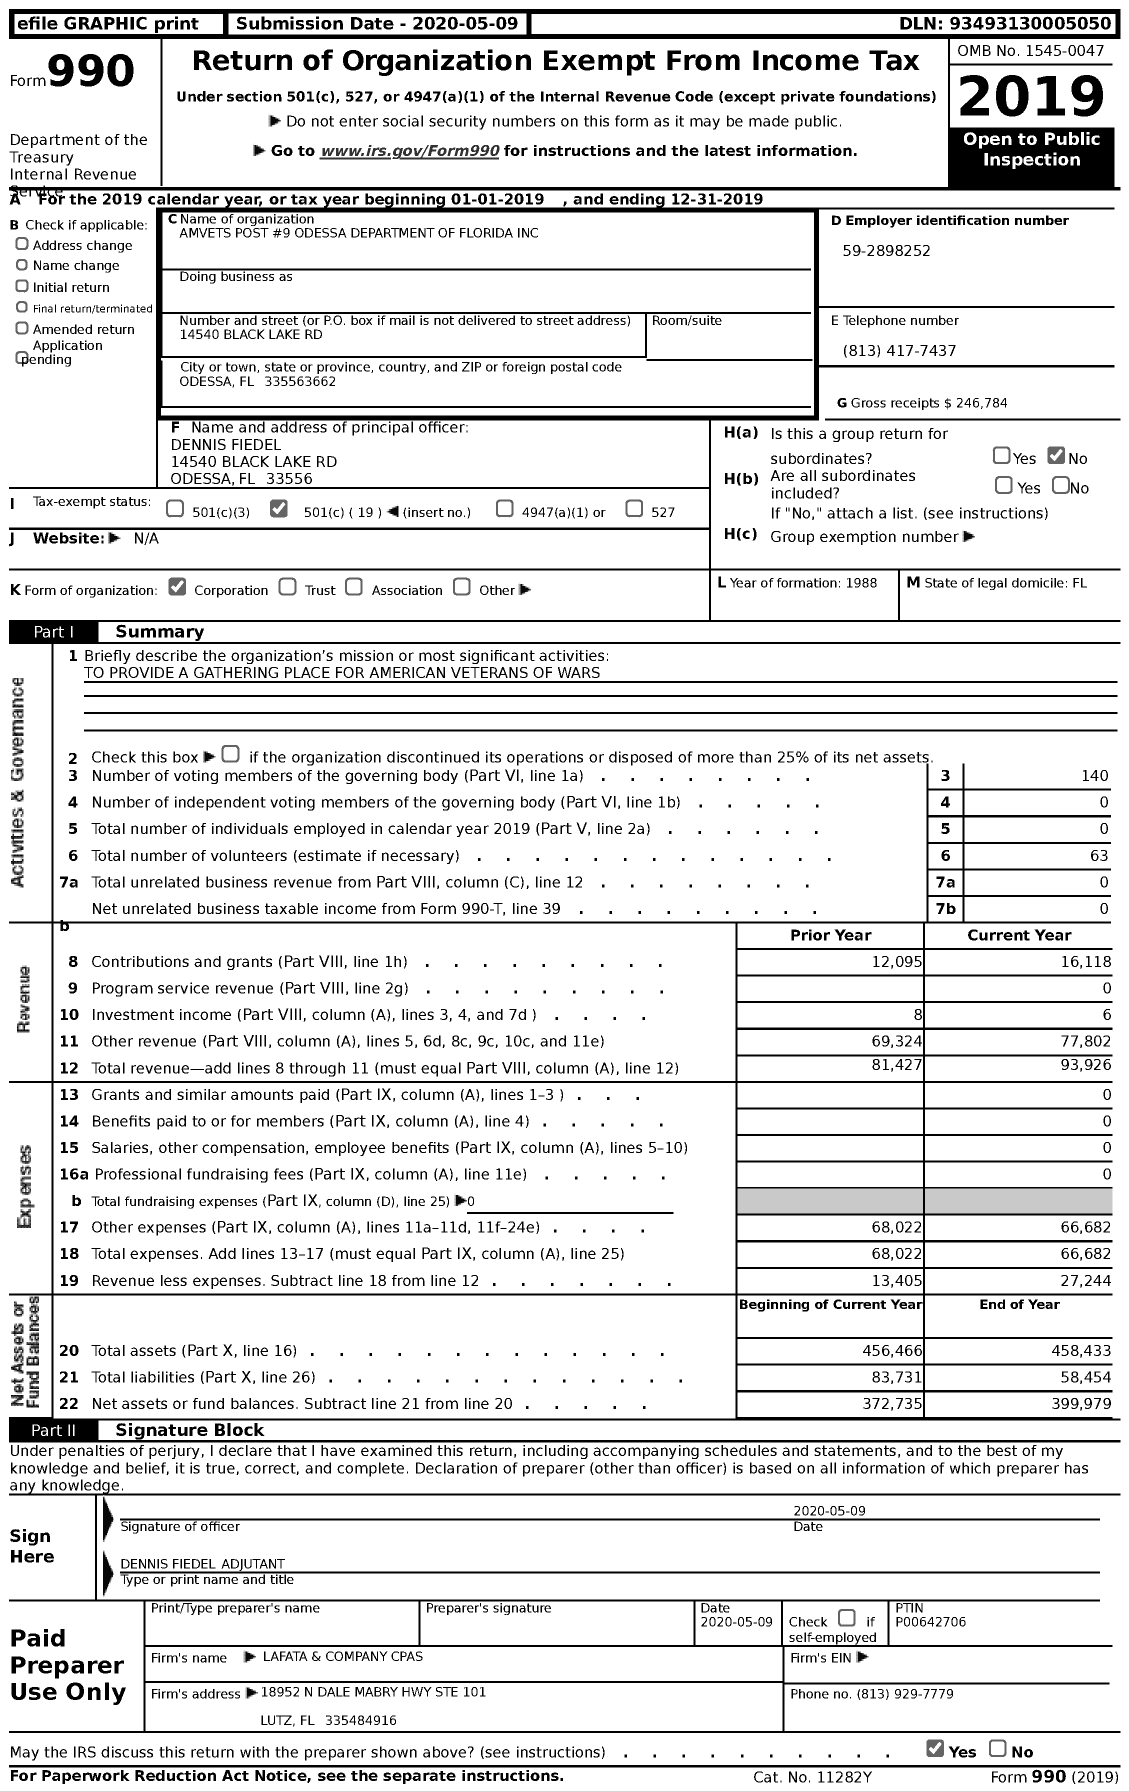 Image of first page of 2019 Form 990 for Amvets Post #9 Odessa Department of Florida